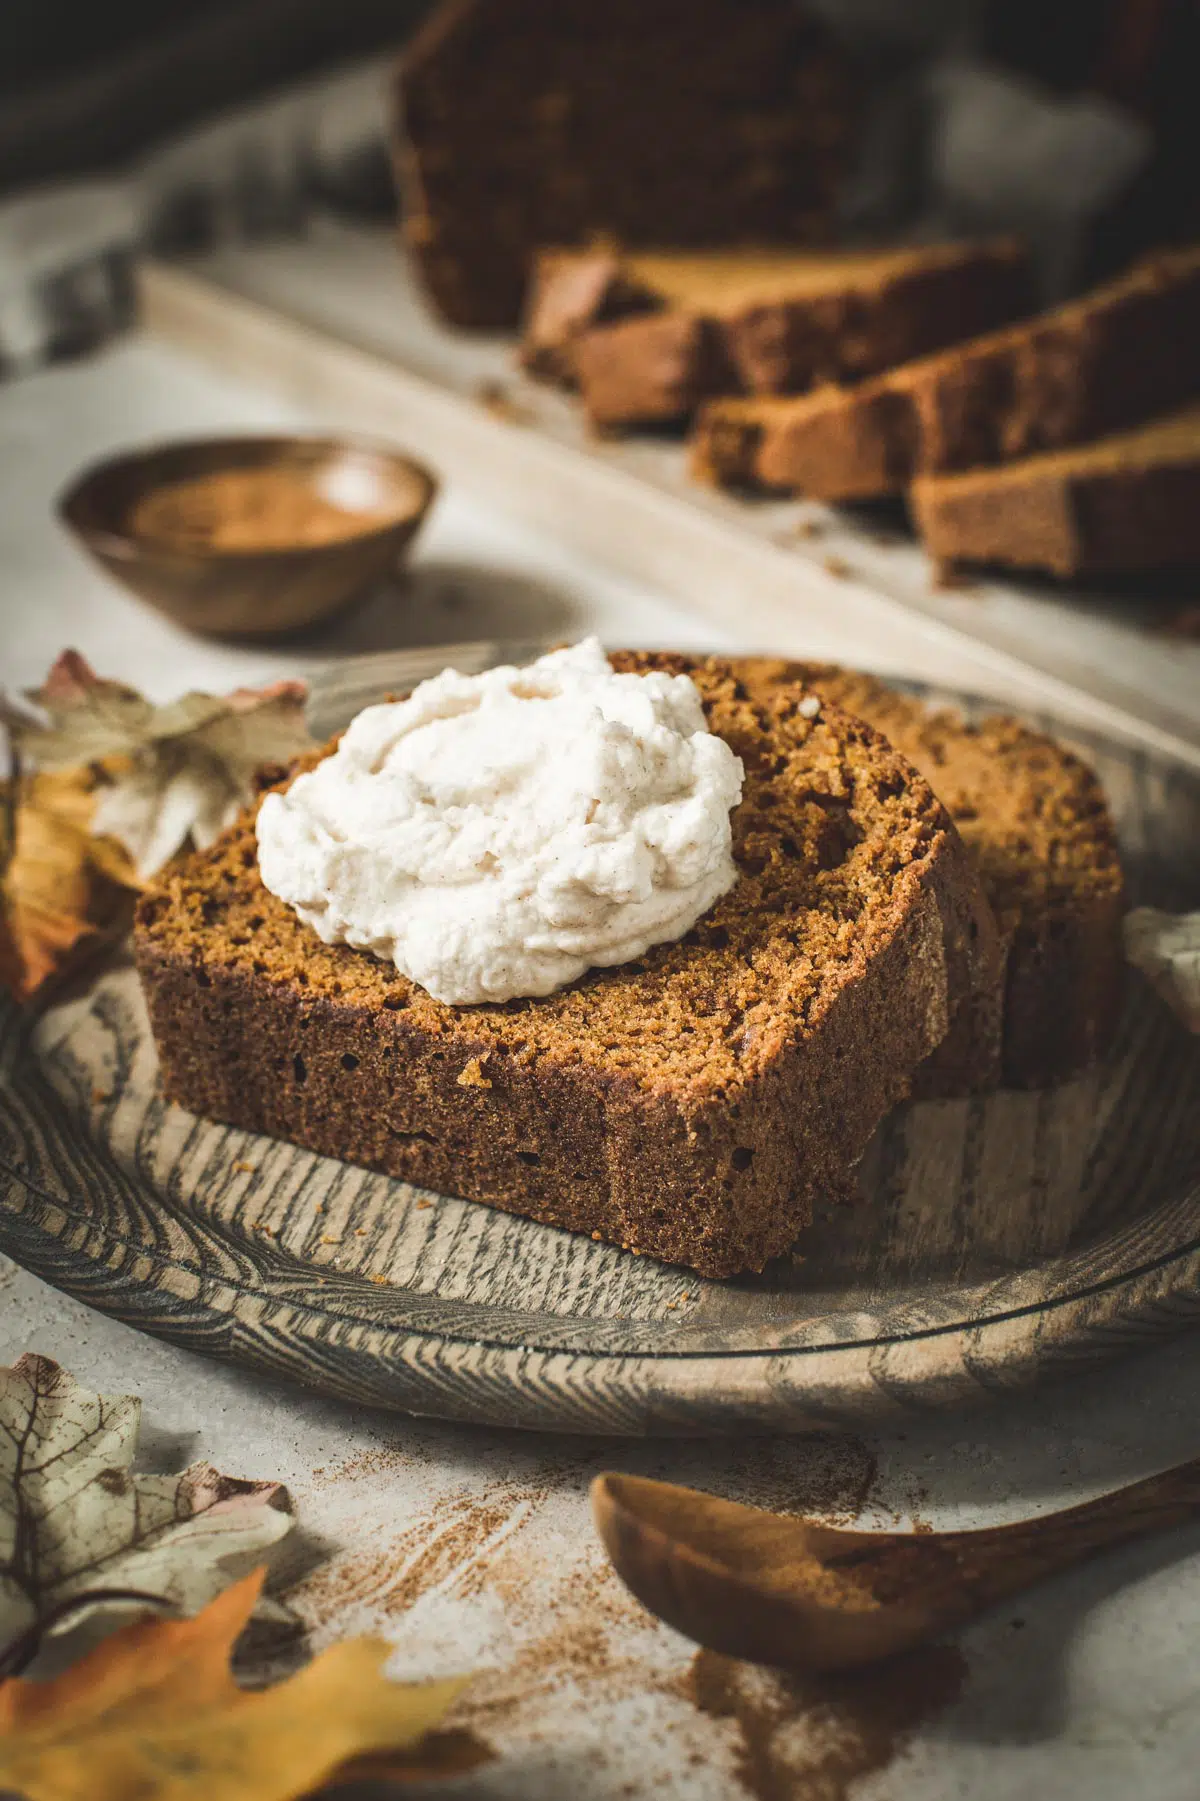 Slice of pumpkin bread topped with whipped cream on a wooden plate.